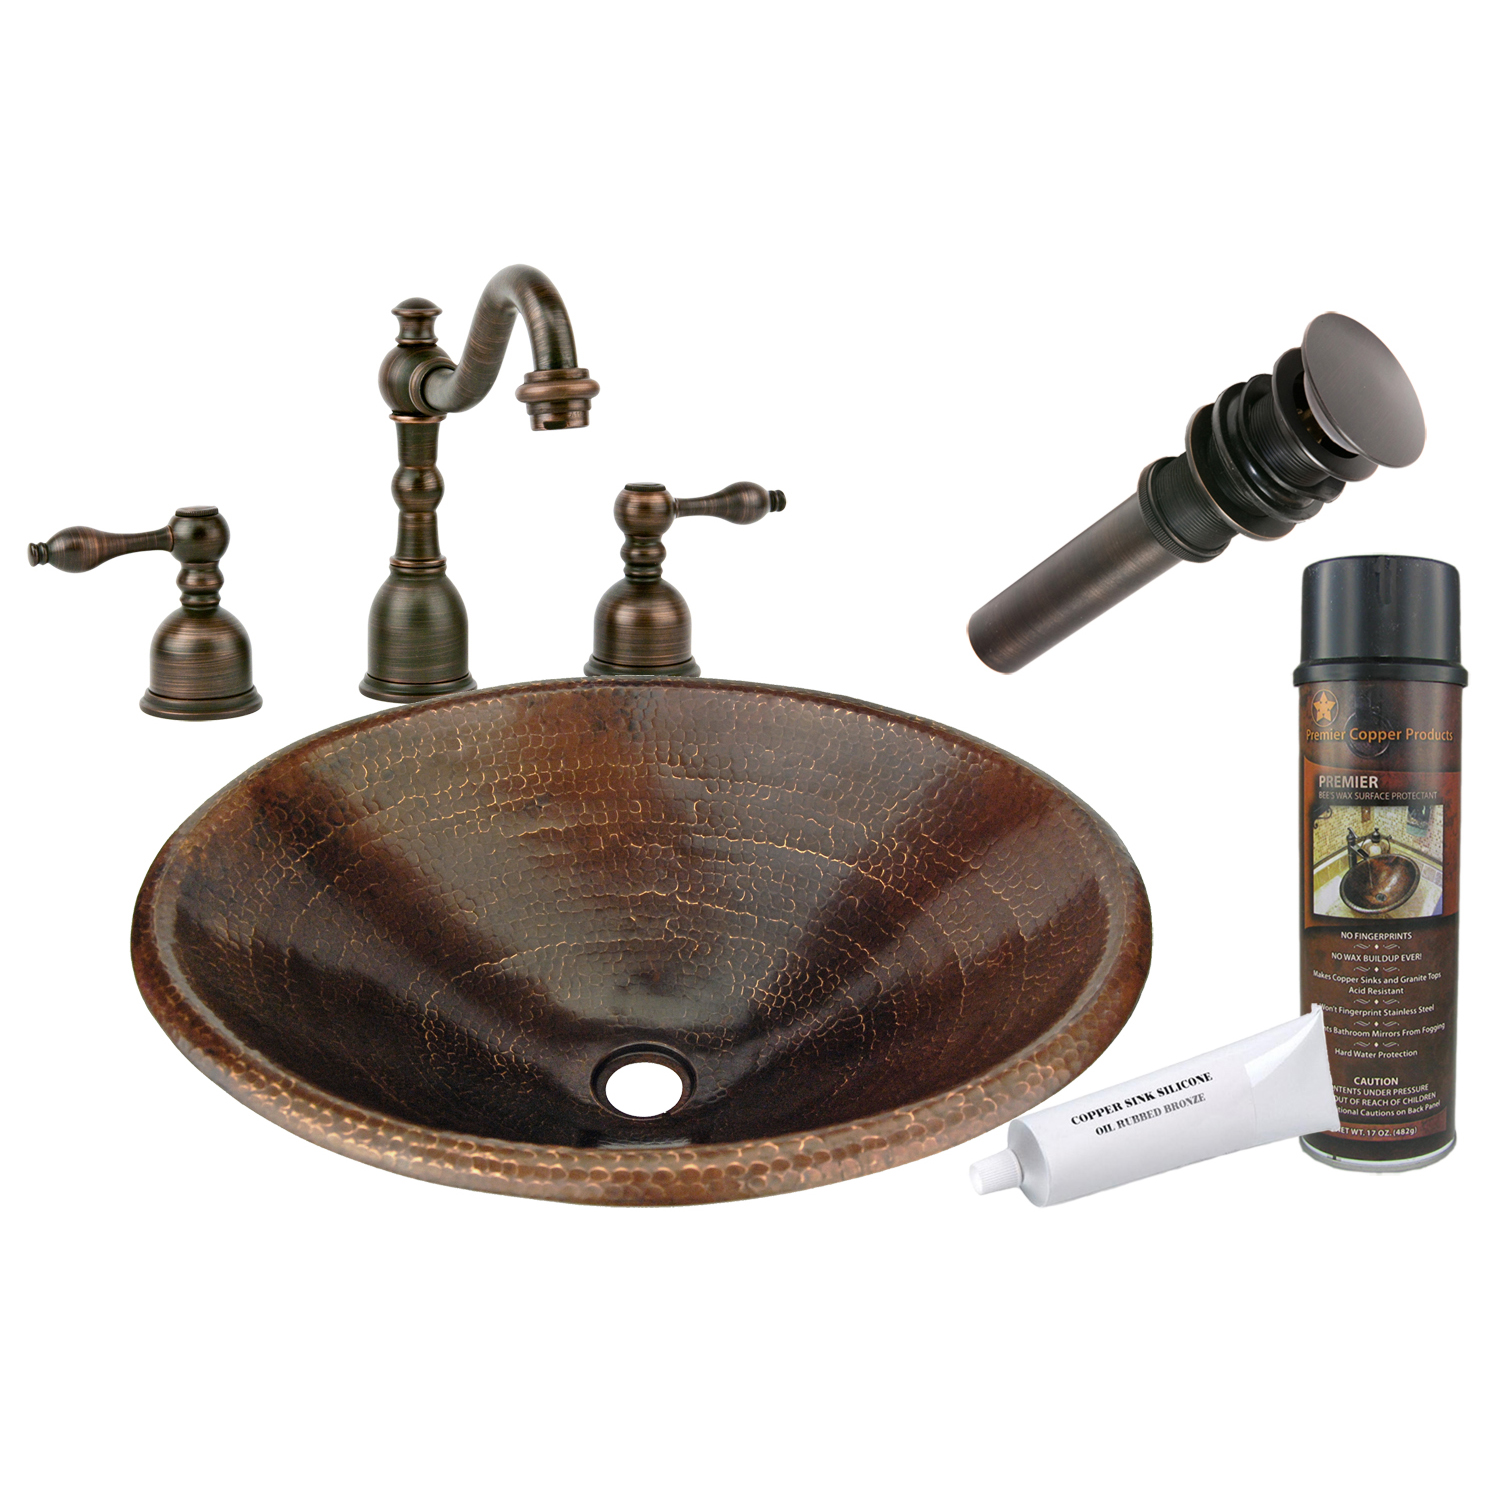 Master Bath Oval Self Rimming Hammered Copper Bathroom Sink, Faucet And Accessories Package, Oil Rubbed Bronze